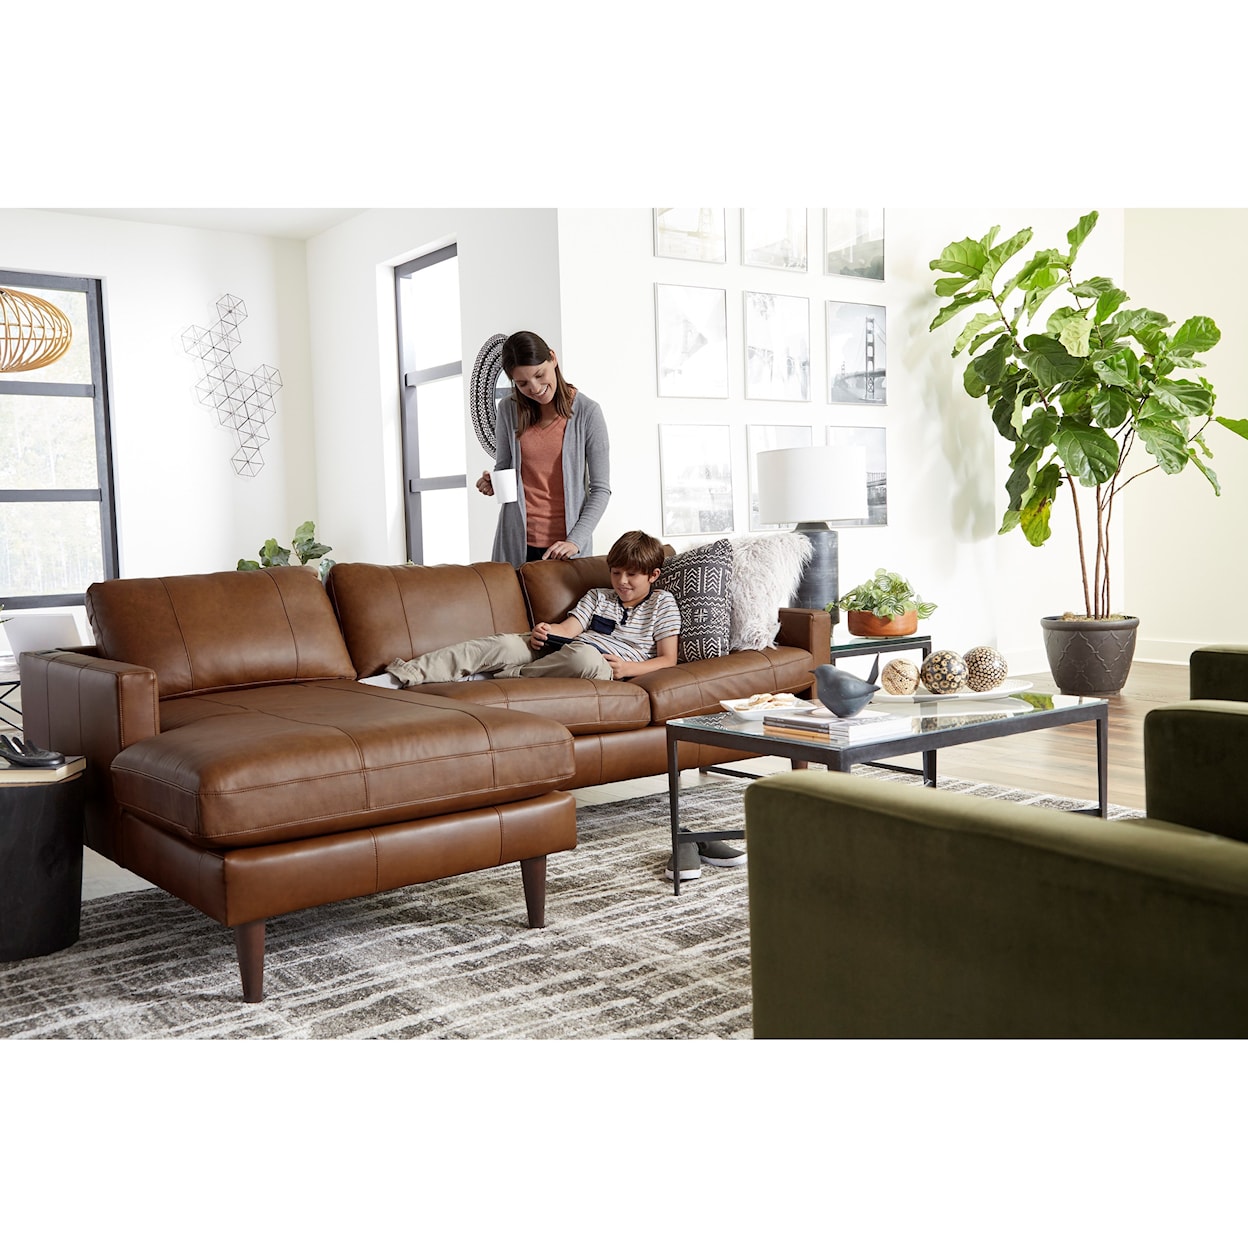 Bravo Furniture Trafton Chaise Sofa with LAF Chaise